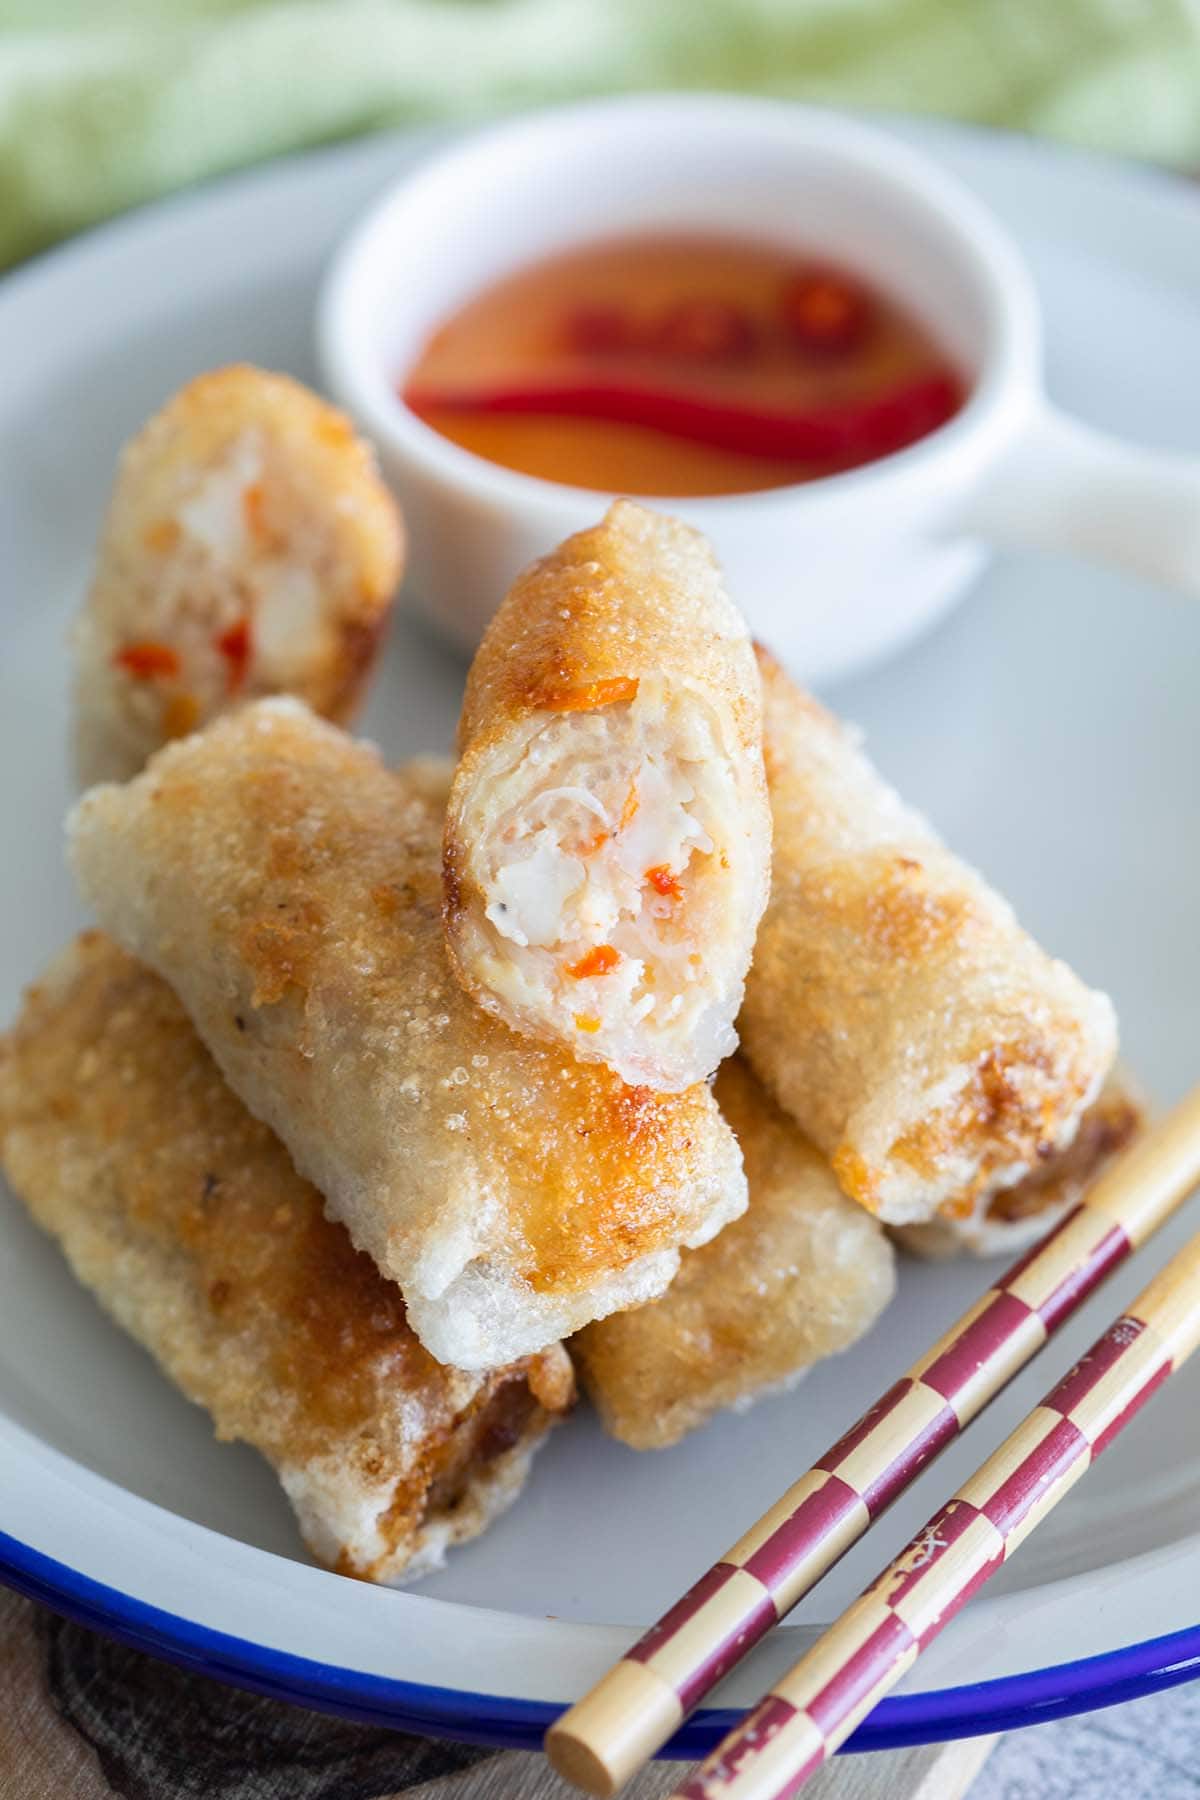 Best Vietnamese spring rolls (Cha Gio) recipe. These crispy fried Vietnamese rolls are crispy with ground pork filling and served with a dipping sauce.